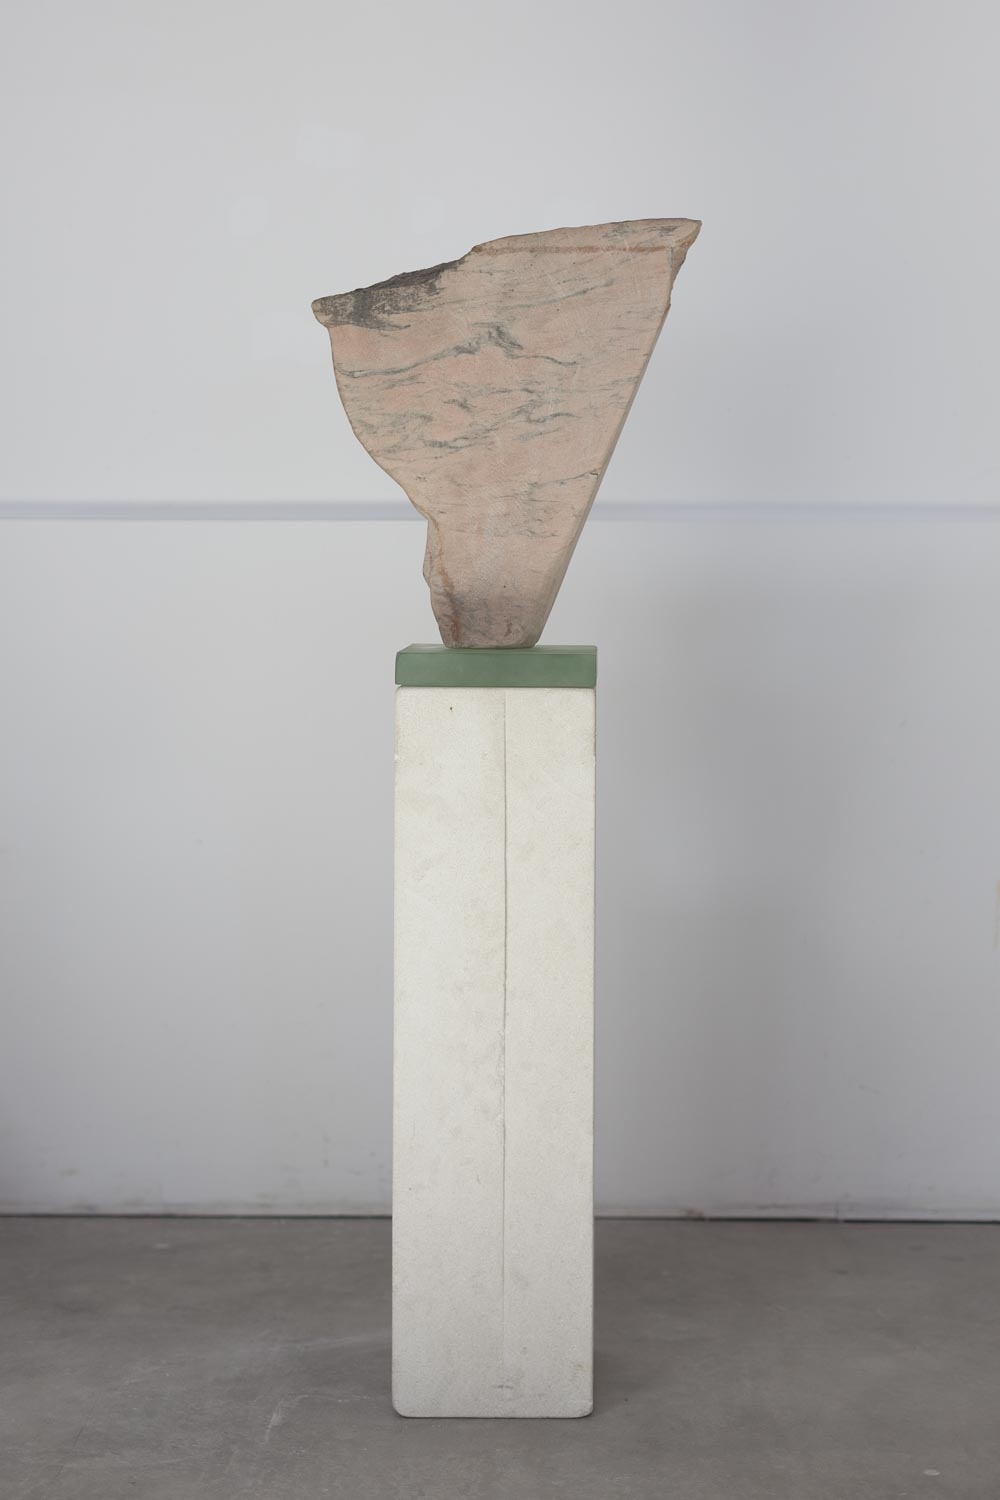  “Horse Drinking Water,” 2018   Portuguese marble, kiln cast glass and limestone  48 x 16.5 x 9 inches    